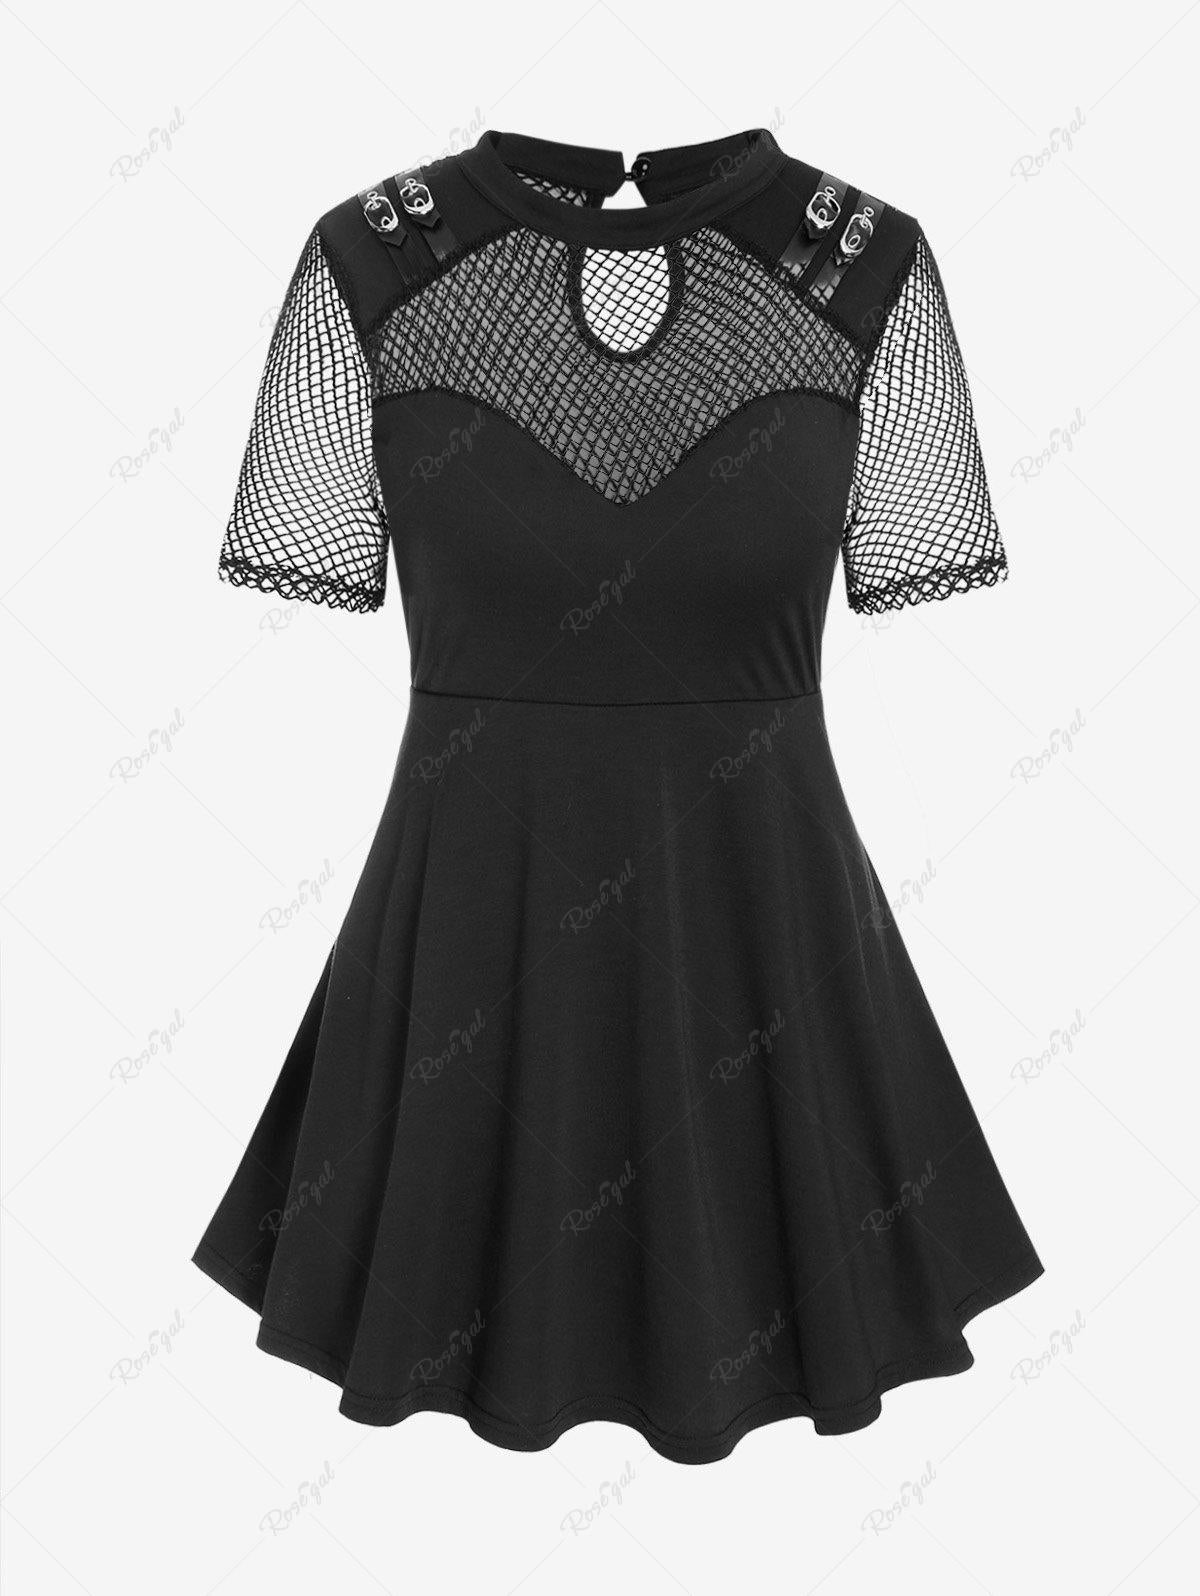 Gothic Sheer Fishnet Panel Grommets Buckle PU Leather Strap Top